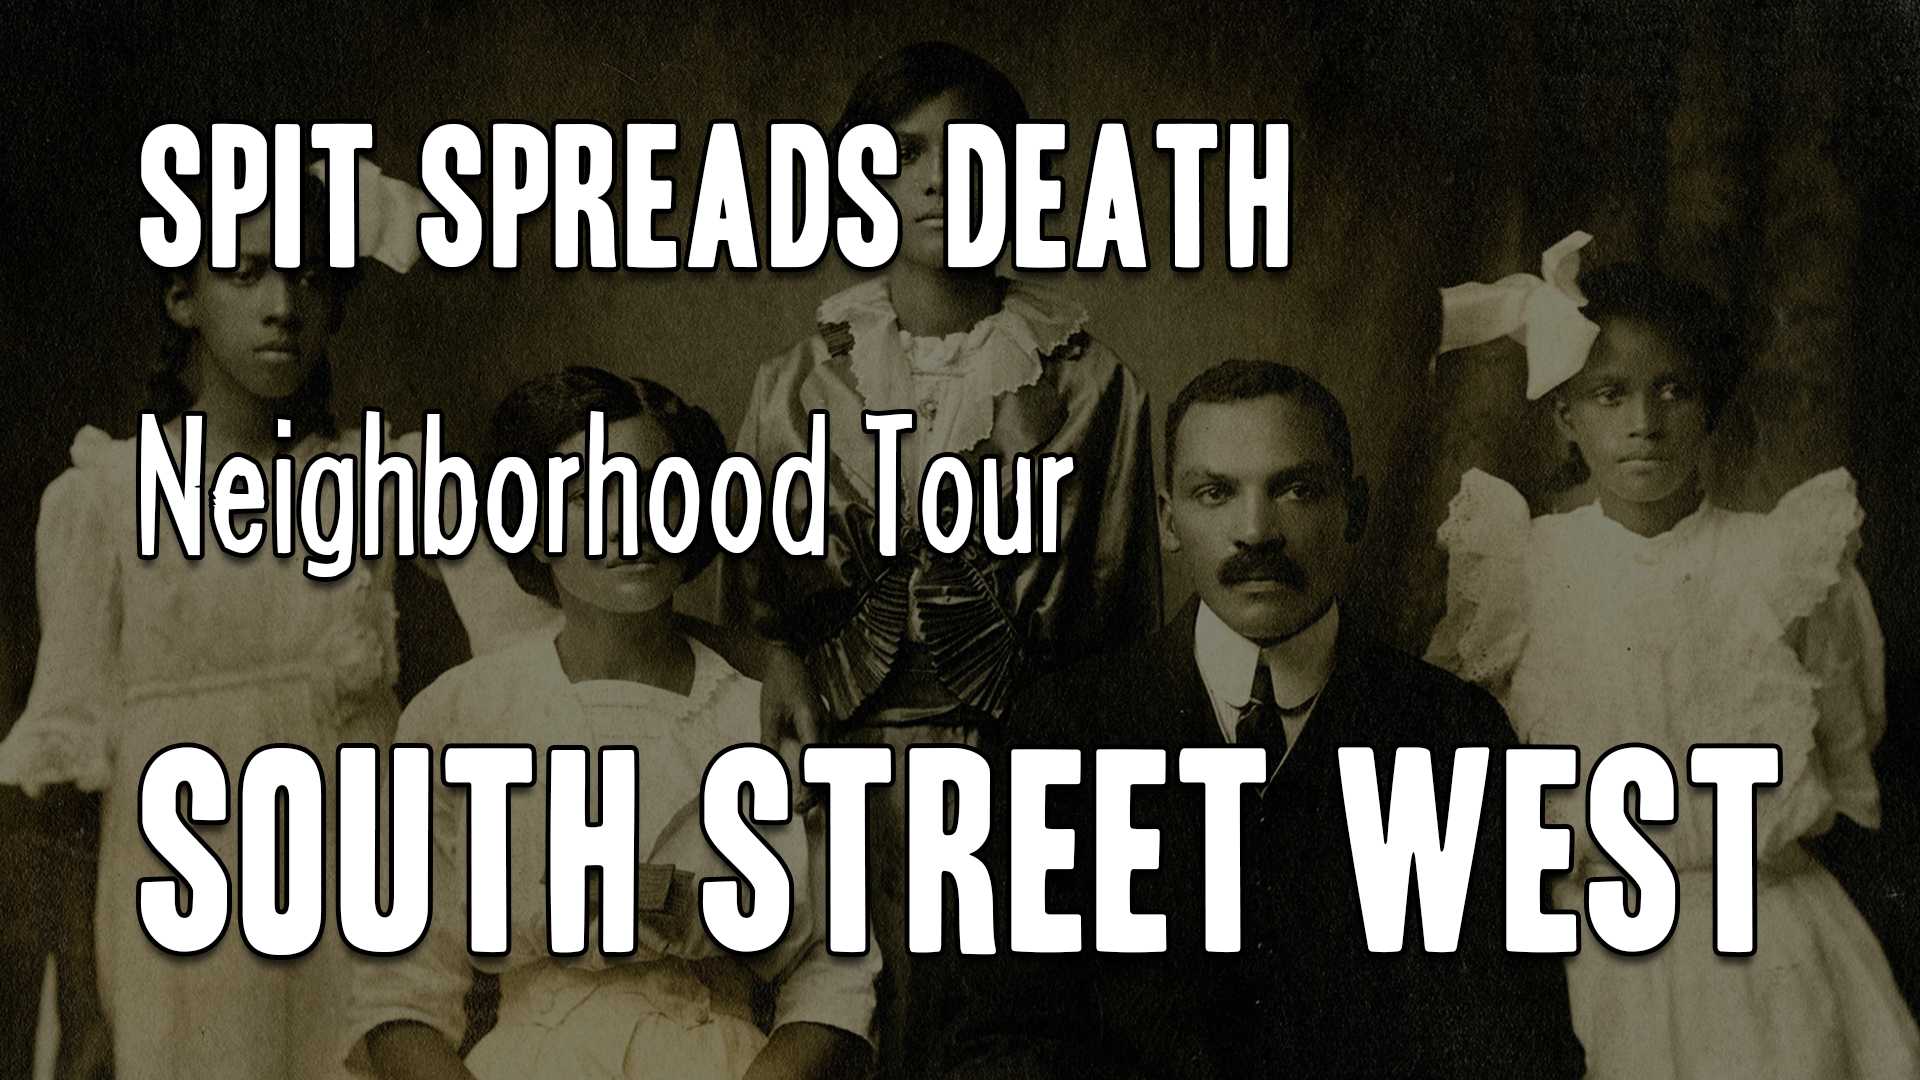 Text overlaid on an old photograph of an African American family reading "Spit Spreads Death Neighborhood Tour: South Street West"